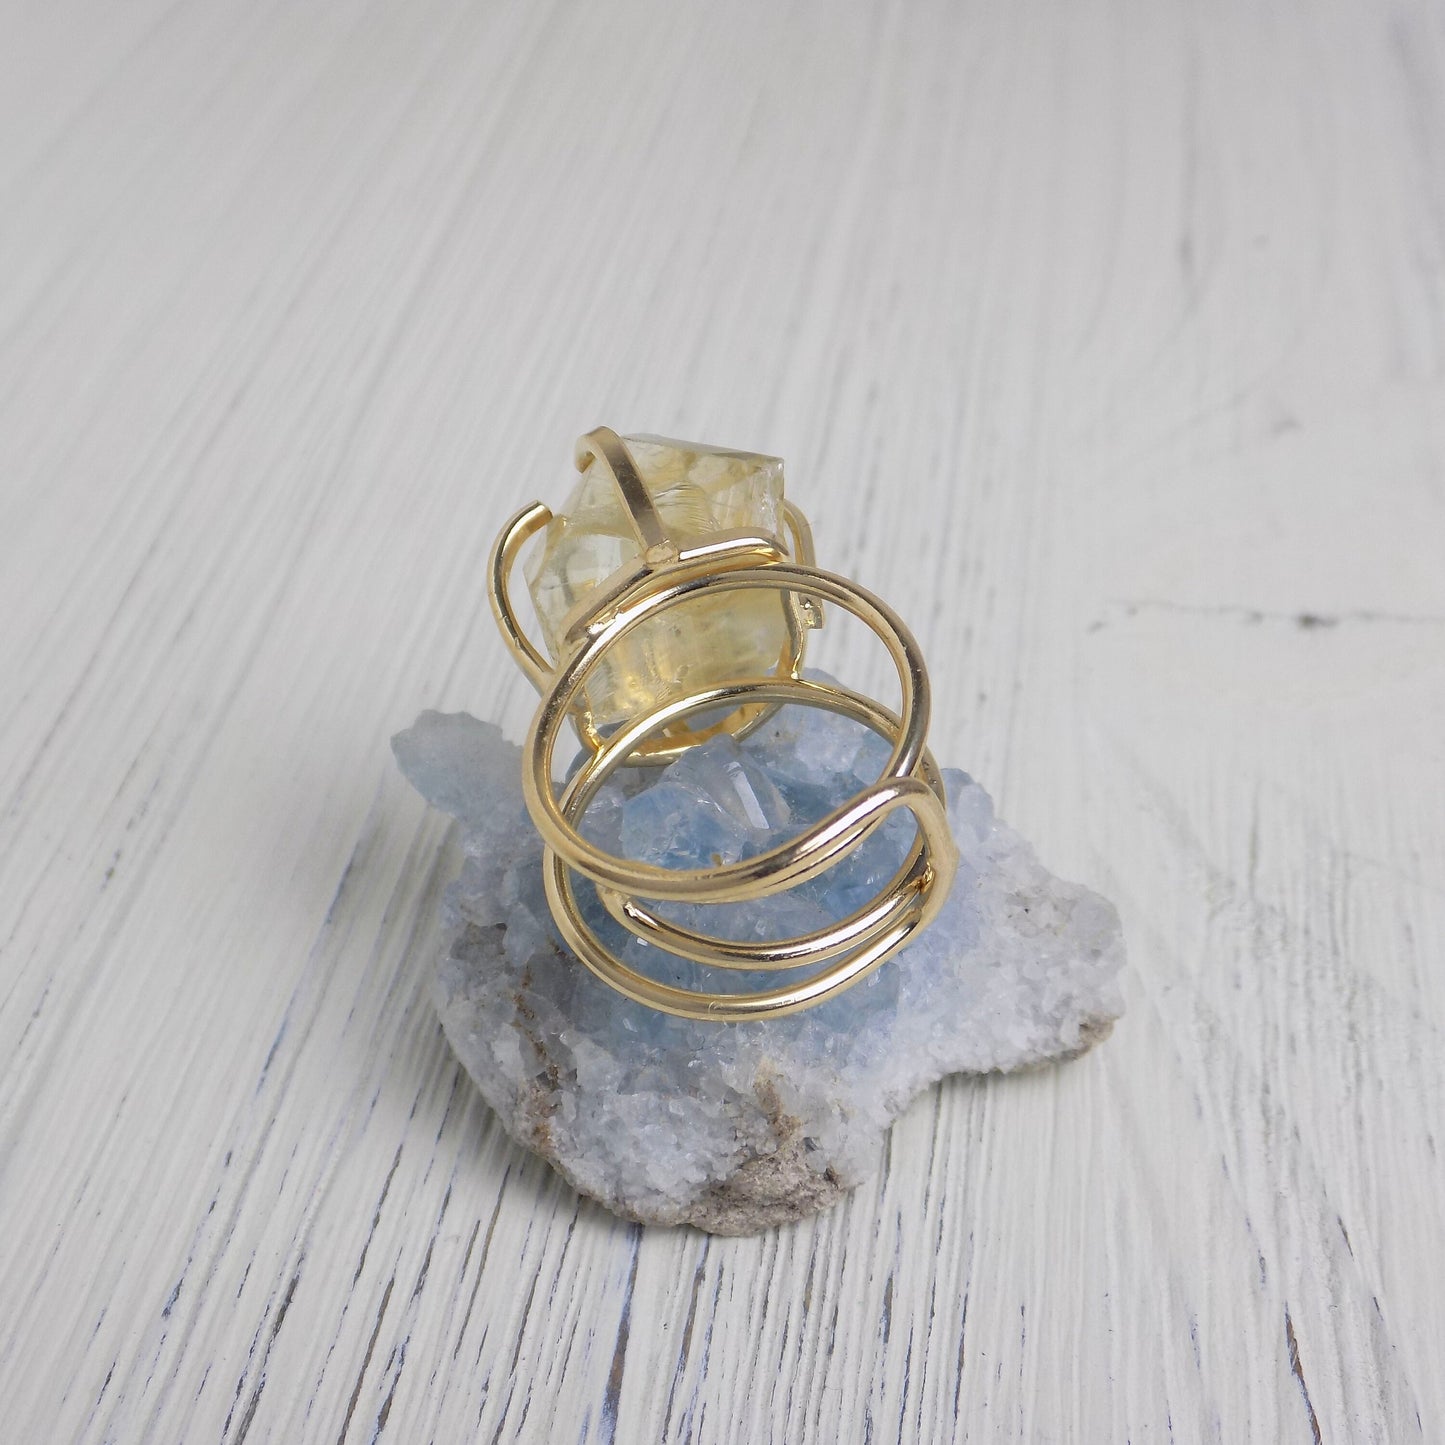 Citrine Ring - Raw Citrine Ring Gold Plated Adjustable Band